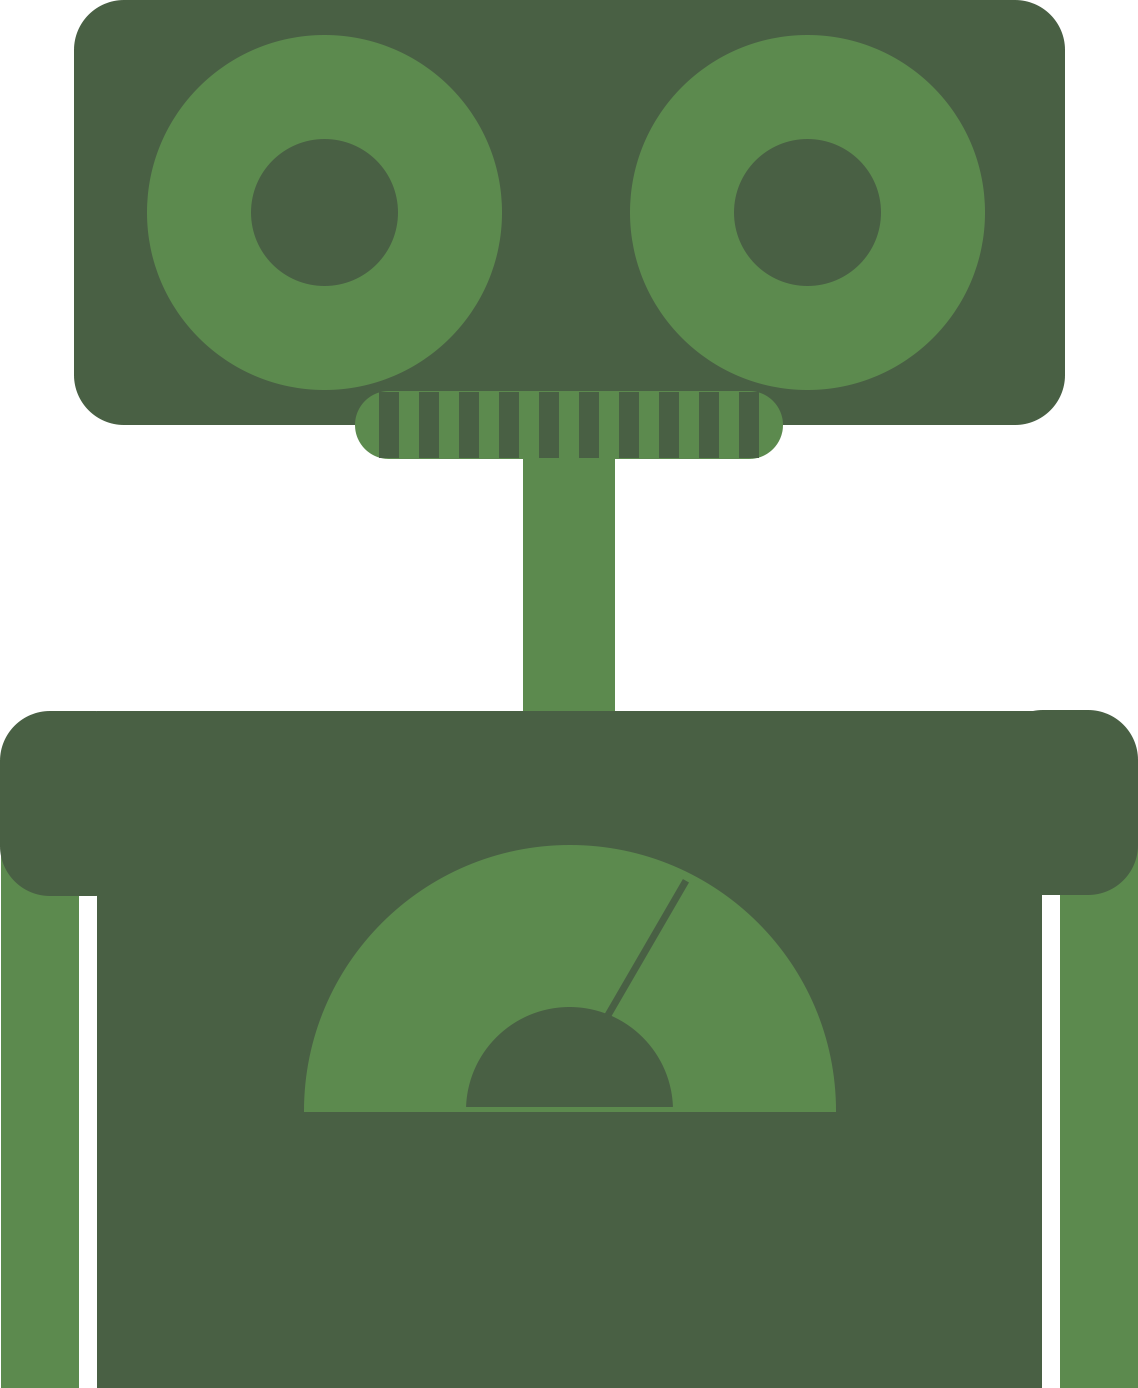 Bitty the Robot